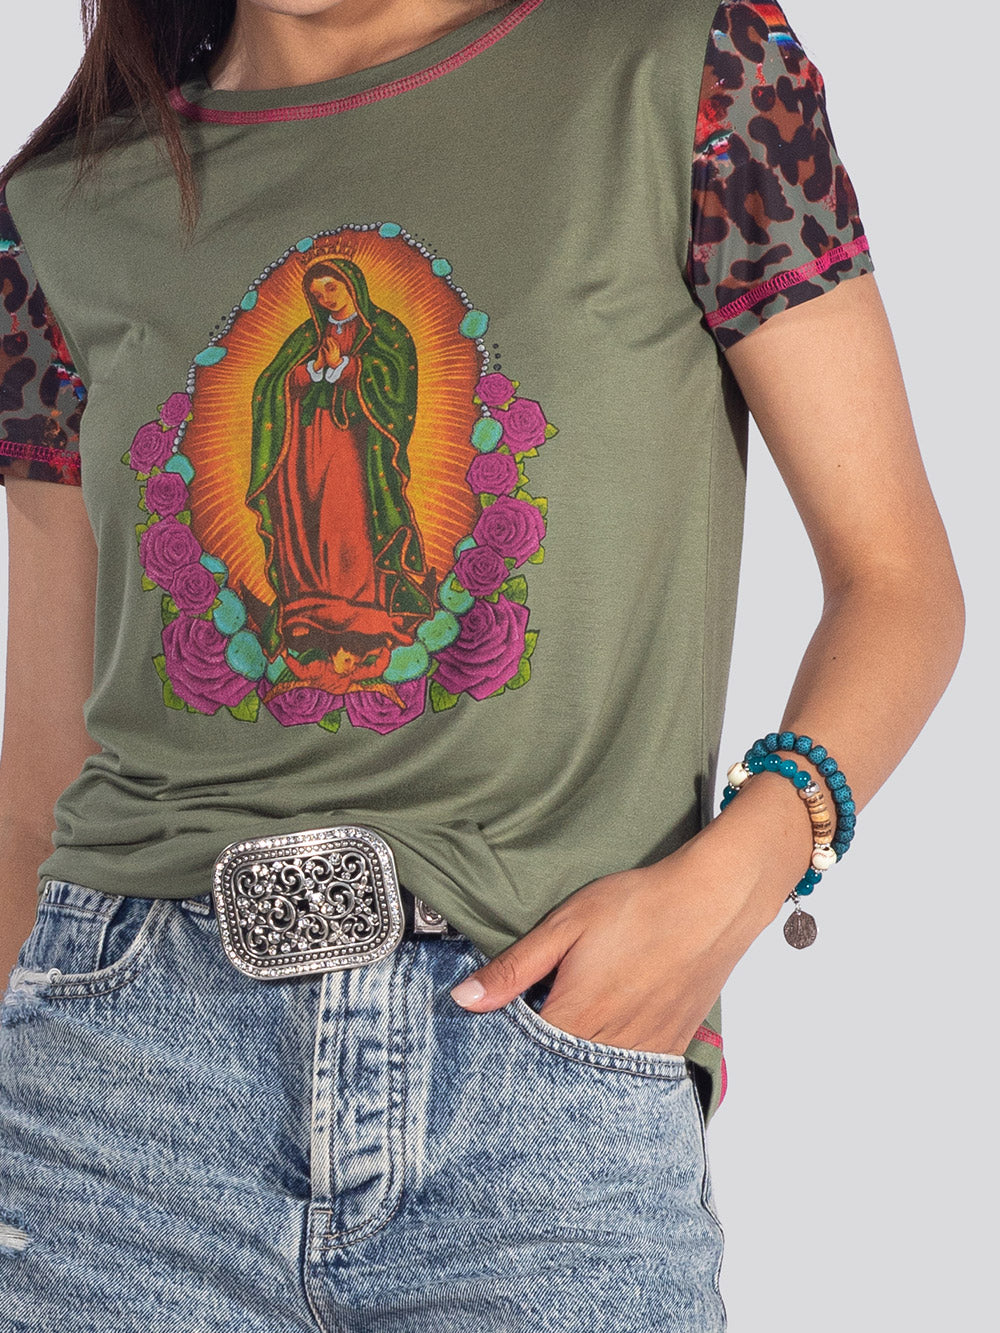 American Bling Our Lady of Guadalupe Women T-Shirt - Montana West World